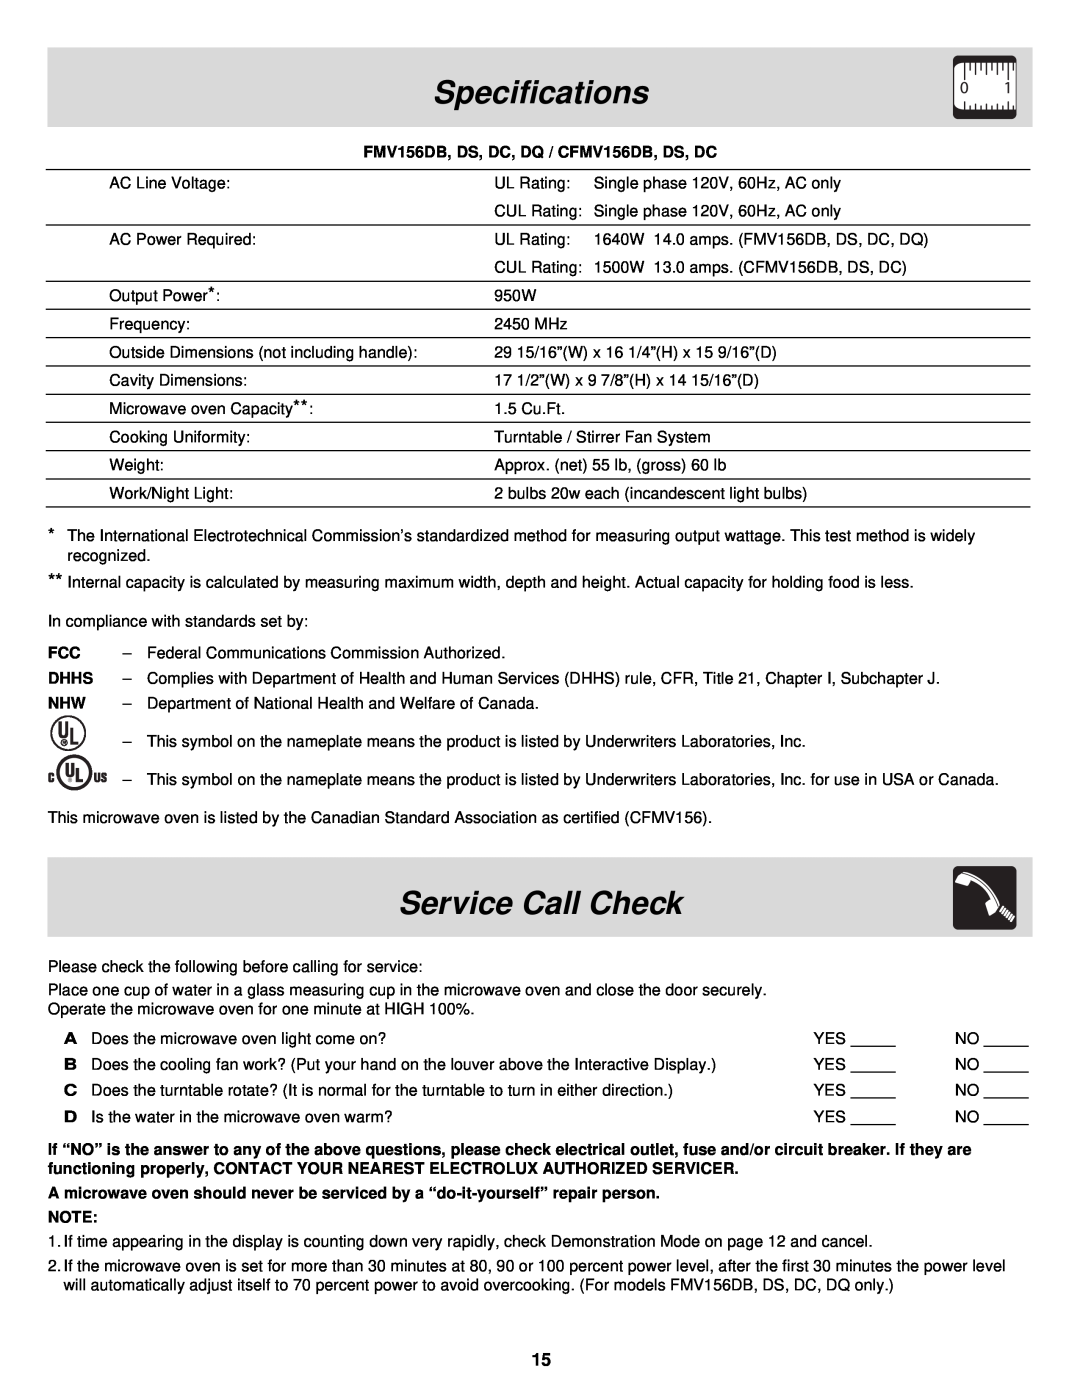 Frigidaire DS, FMV156DB, DC, DQ important safety instructions Specifications, Service Call Check 